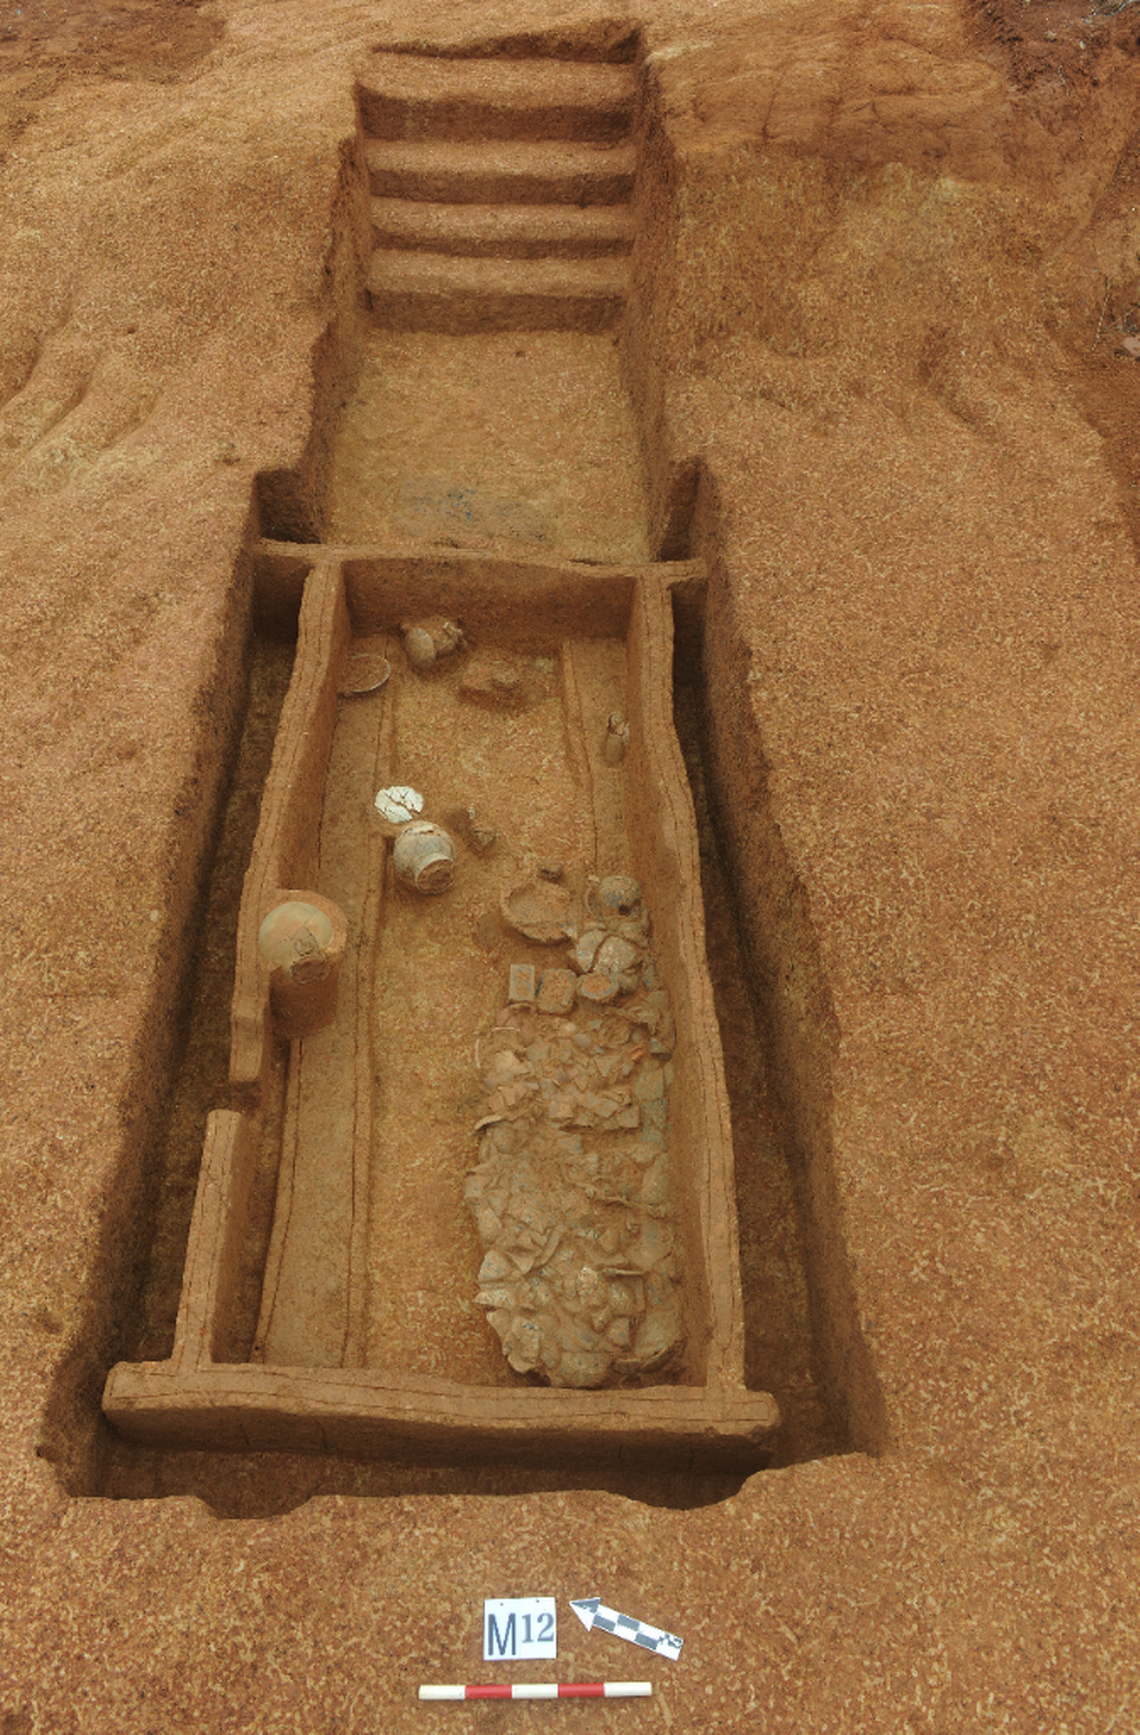 A tomb filled with grave goods unearthed at the Changsha site.